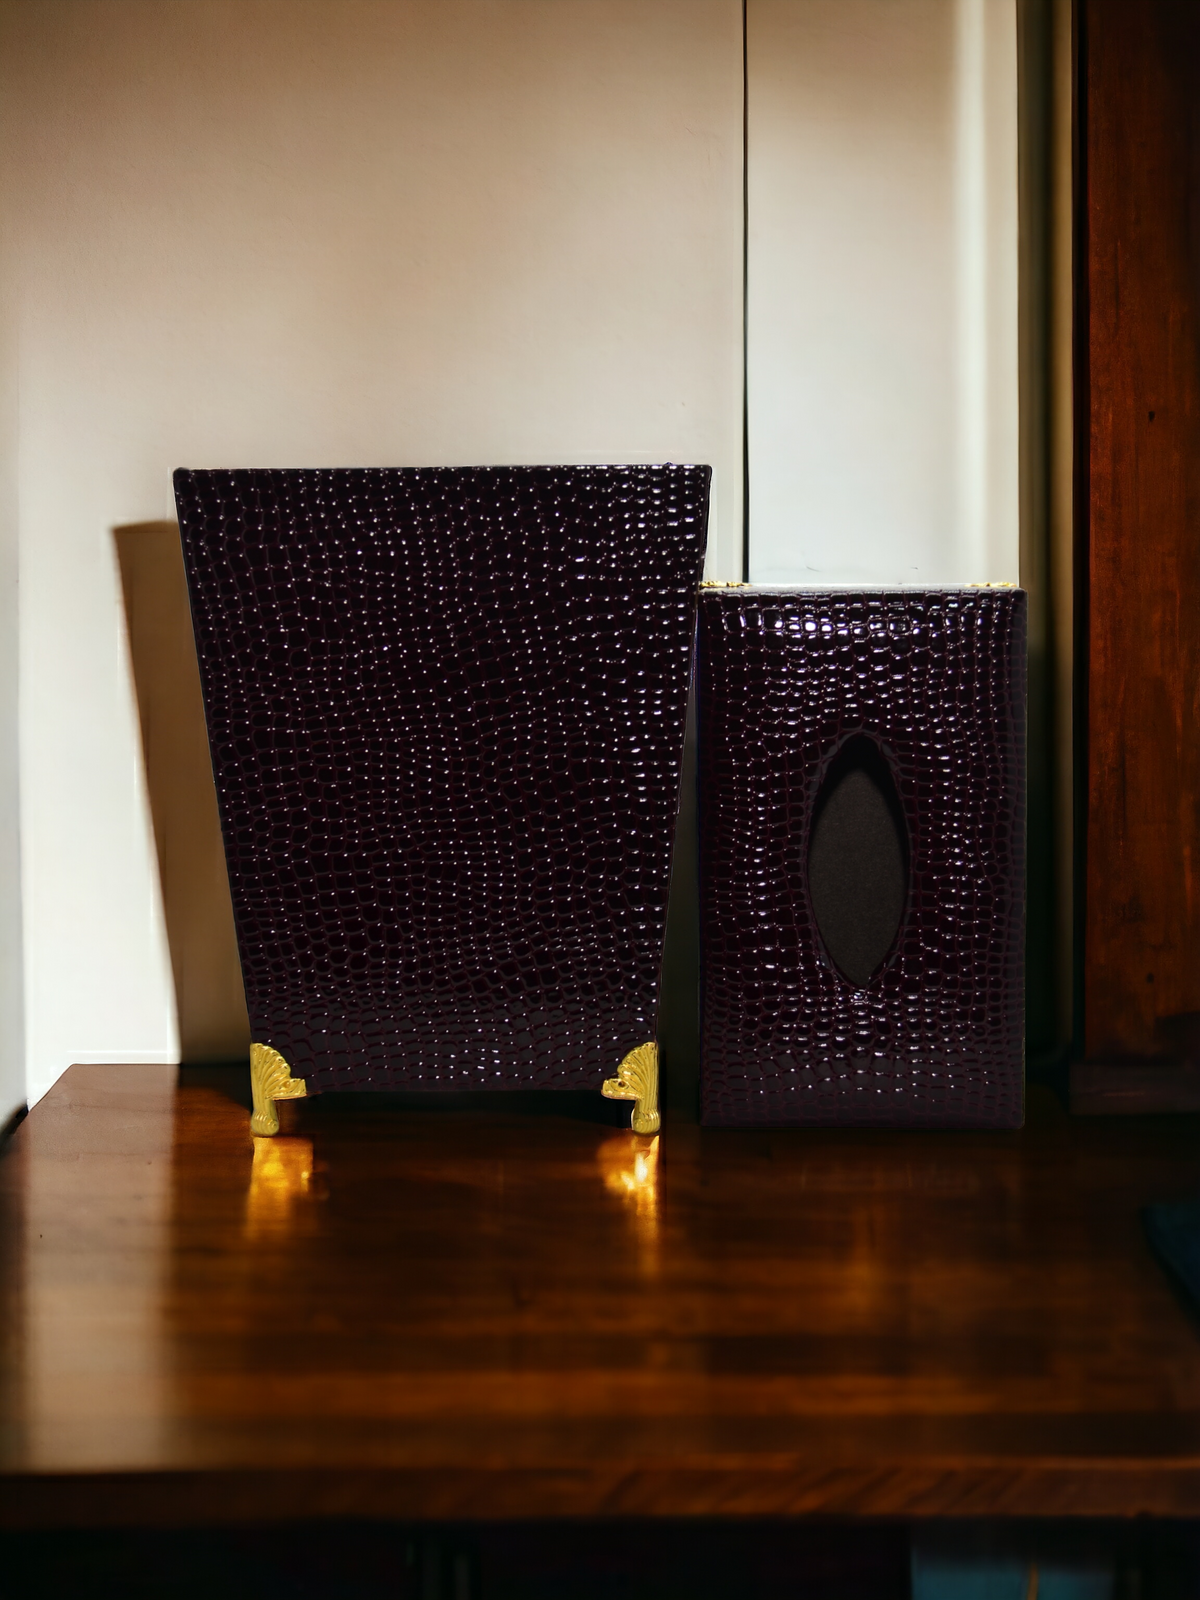 Leather Dustbin With Tissue Box